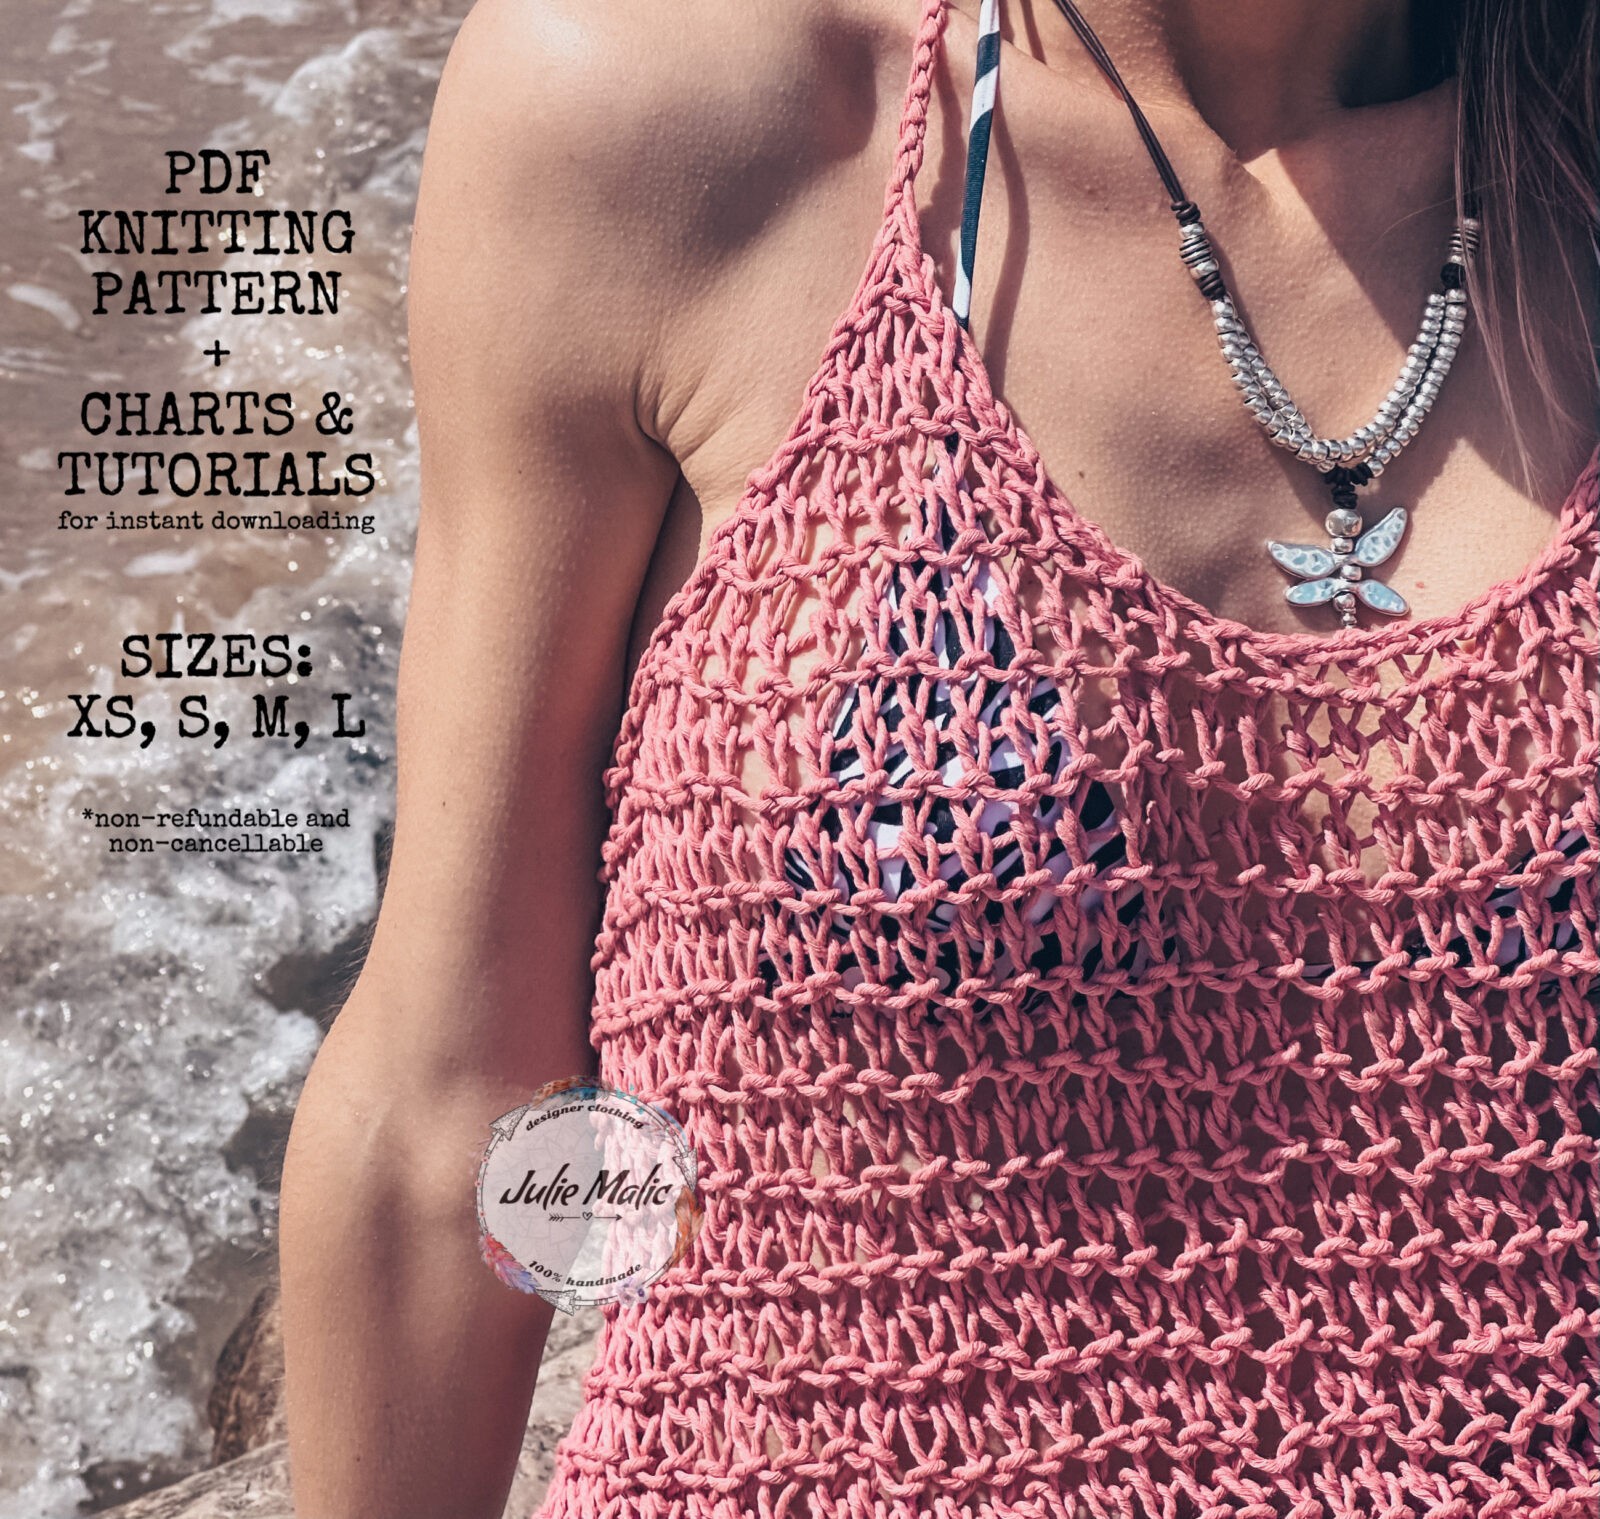 tank top knitting pattern, women's top pattern, summer tank top, knit pattern, easy knitting pattern, knitting tutorial, knitting instruction, pdf pattern for beginners, pdf pattern for instant download, sheer top pattern, sexy beach tops, knitted clothing, bohemian clothing, hand knitted top, hand knitting for beginners, see through tank top, boho knit tank top, beach cover up, handmade clothing, fishnet top, mesh tank top, summer outfit ideas, beach outfit, how to knit, basic top pattern, loose knit tank tops pattern, chunky knit clothing, knitting inspiration, diy knitting tutorial, step by step pattern, 21th birthday gift for her, halter top, bohemian gypsy top, boho clothing, boho crop top, country tank top, crochet tank top, festival outfit, halter neck top, hand knitted, hand knit tank top, knitted tank top, lace halter top, mesh crop top, minimalist top, open back top, off shoulder top, orange summer top, organic tank top, racerback top, see through top, semi sheer top, sexy top, sheer crop top, tribal clothing, woven top, women knitted top